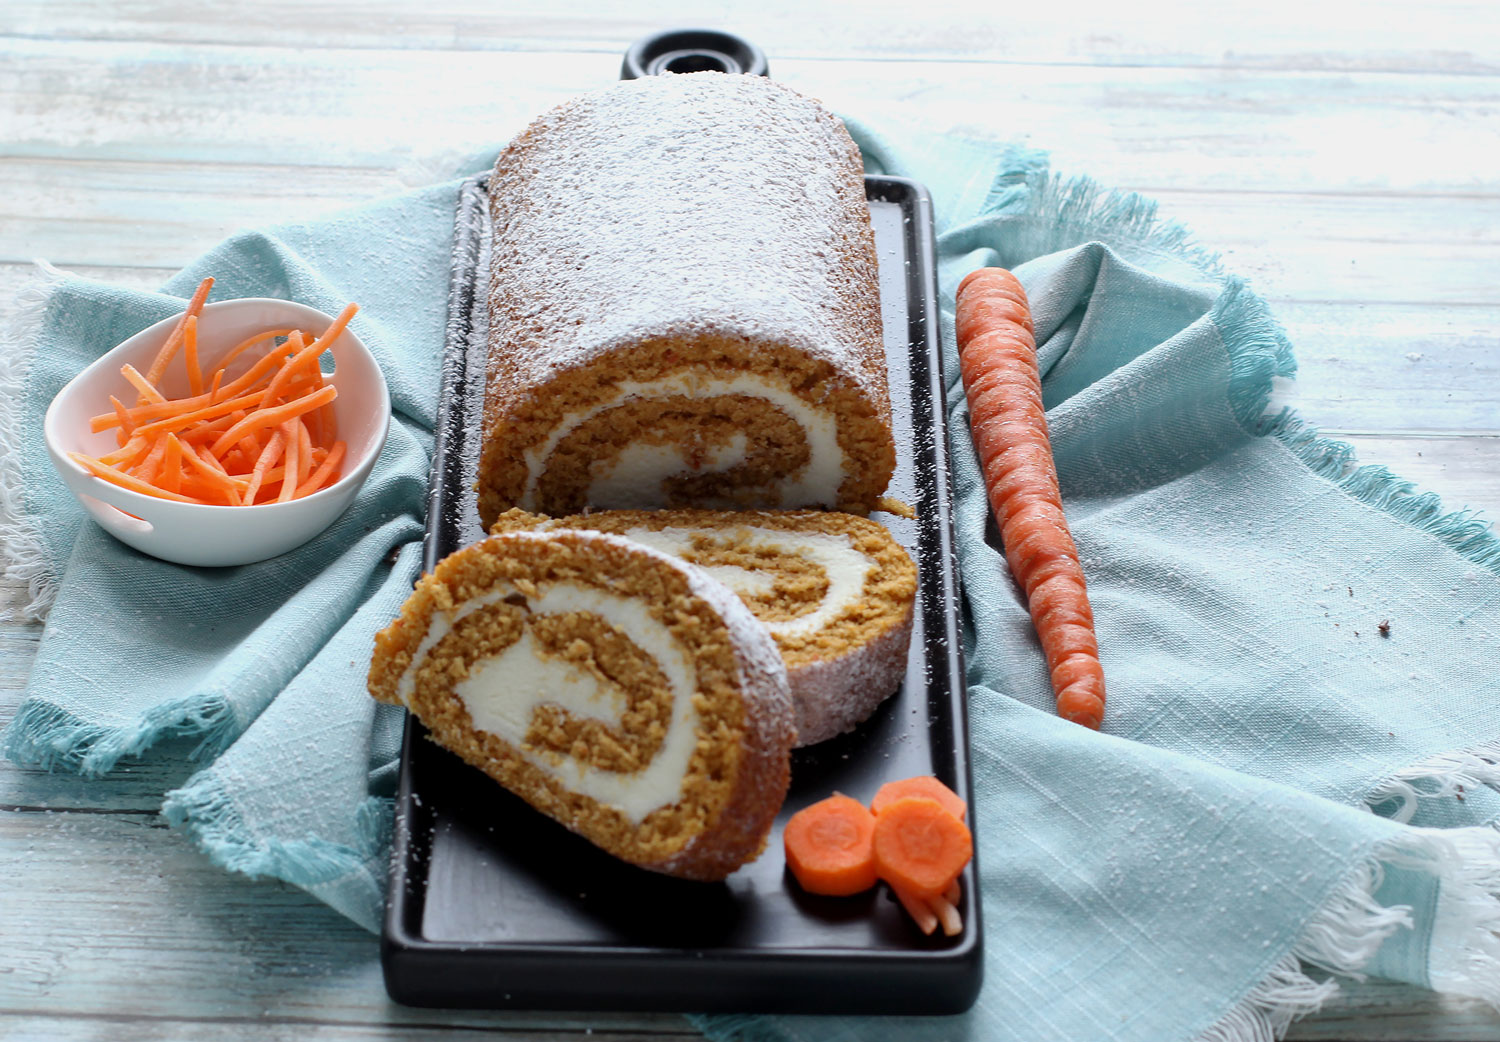 Carrot Cake Roll and slices on cutting board next to whole carrot and bowl of carrot shavings